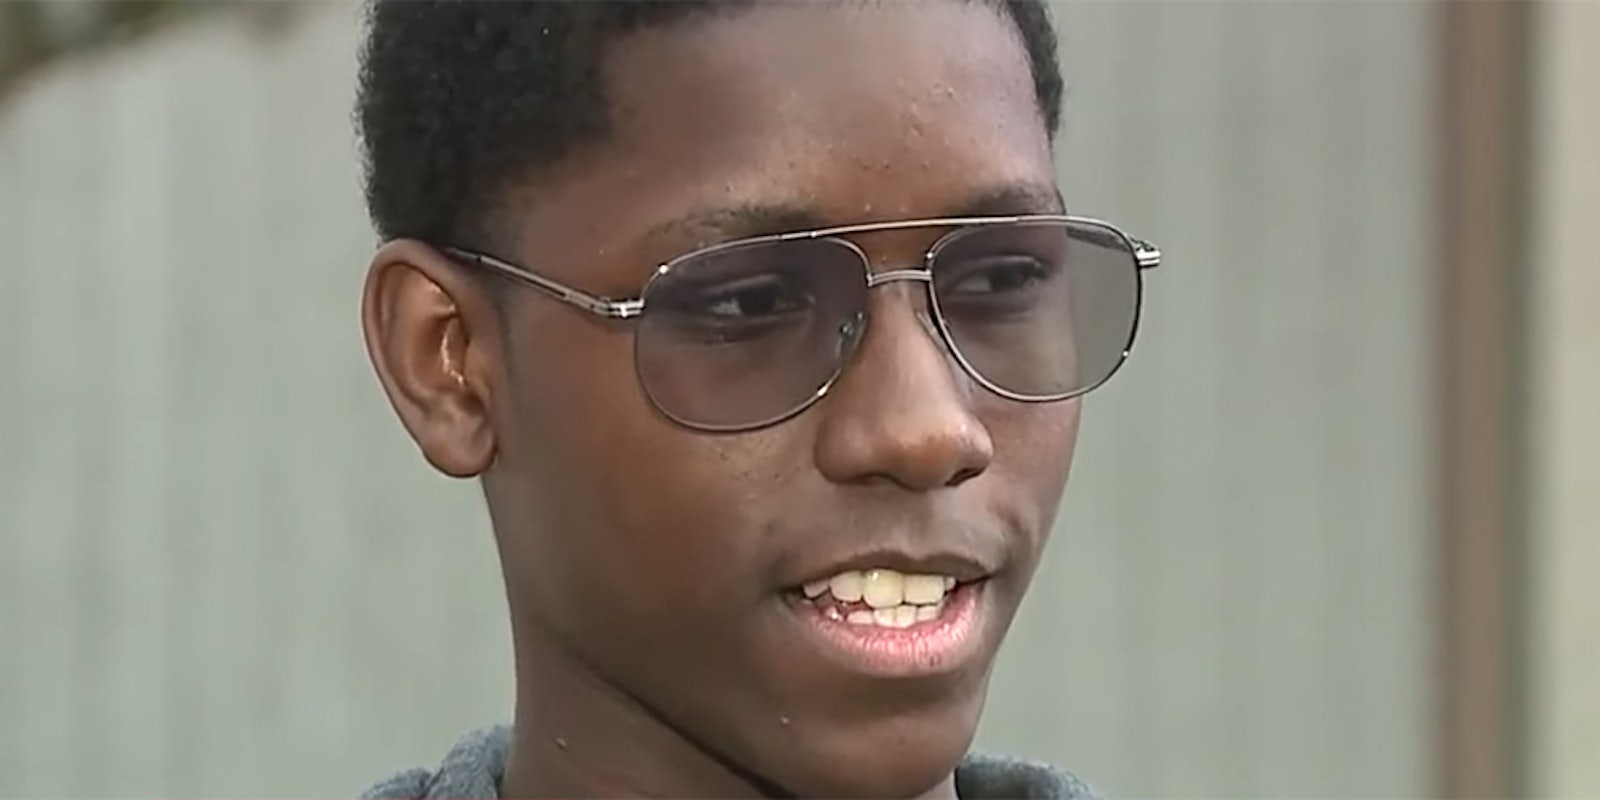 A Michigan man reportedly shot at a Black teen who had stopped at his house to ask for directions.